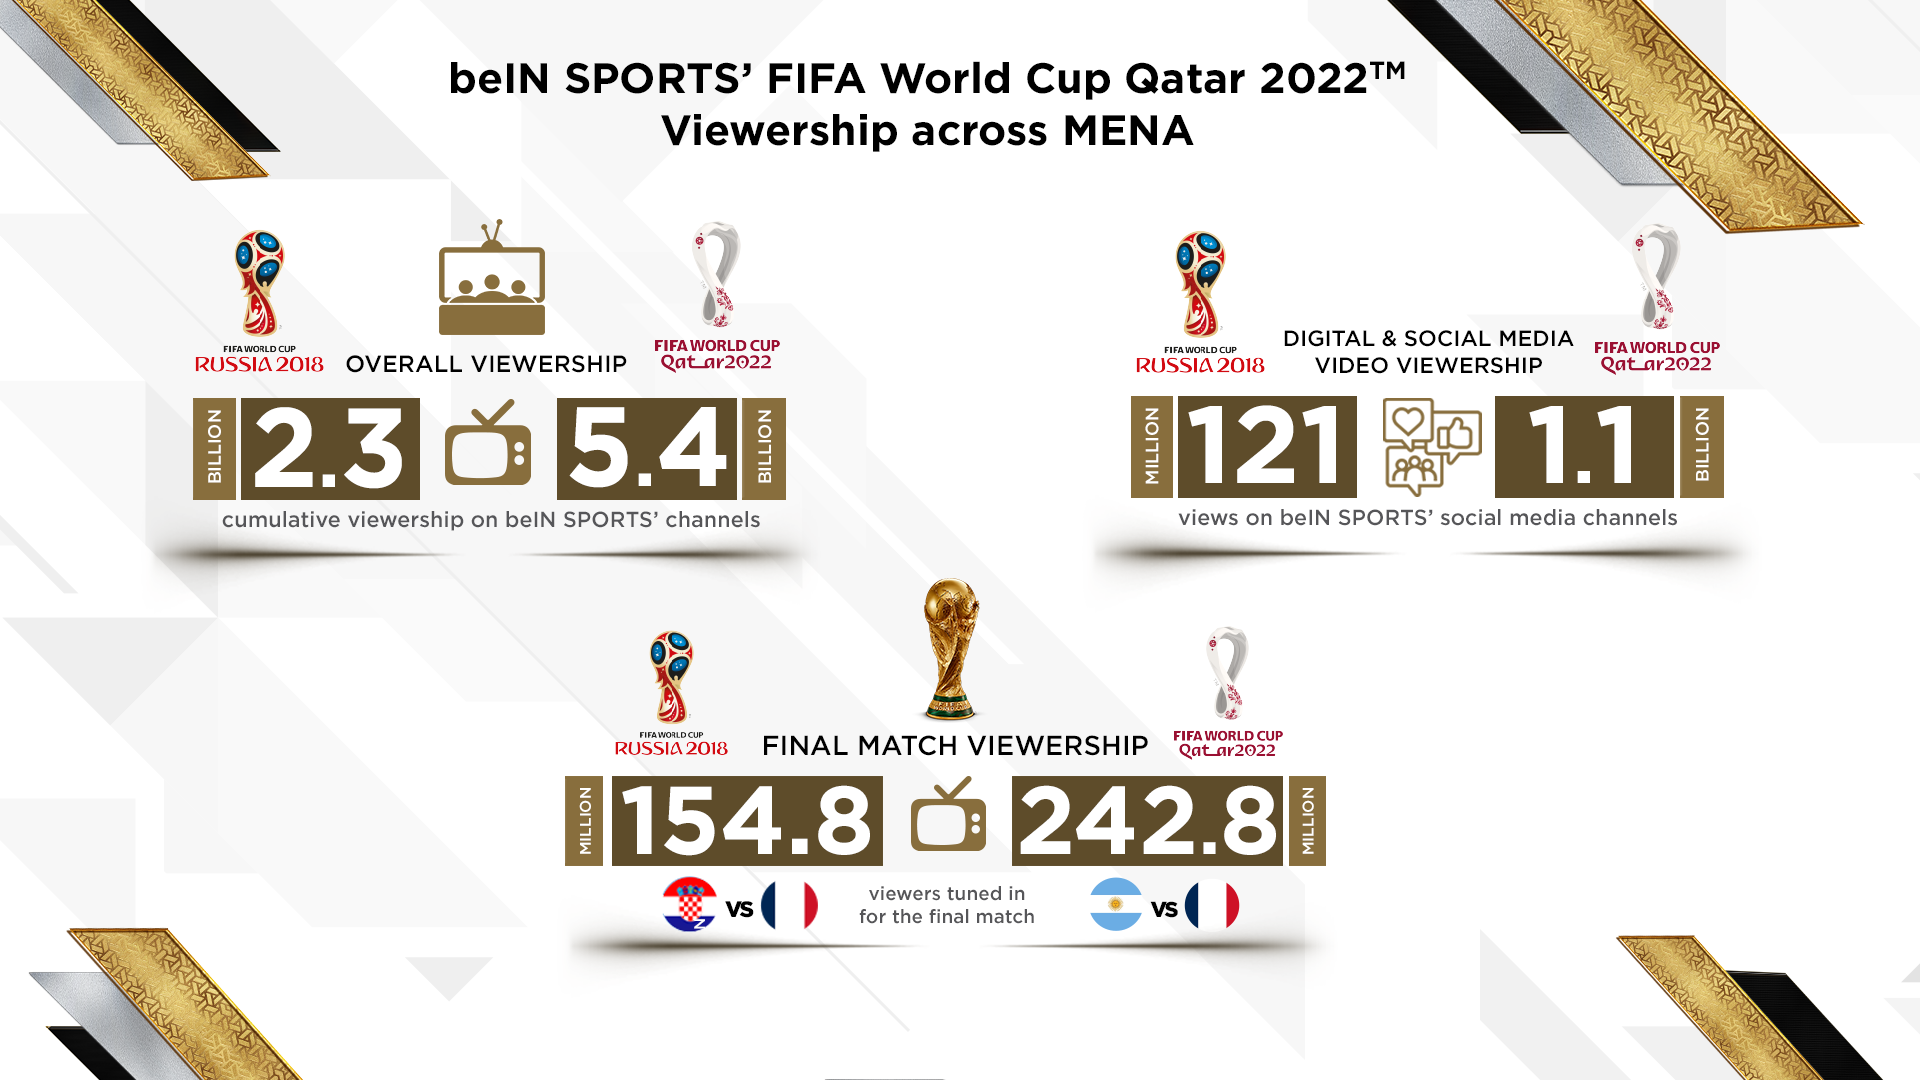 beIN SPORTS announces recordbreaking cumulative viewership of 5.4